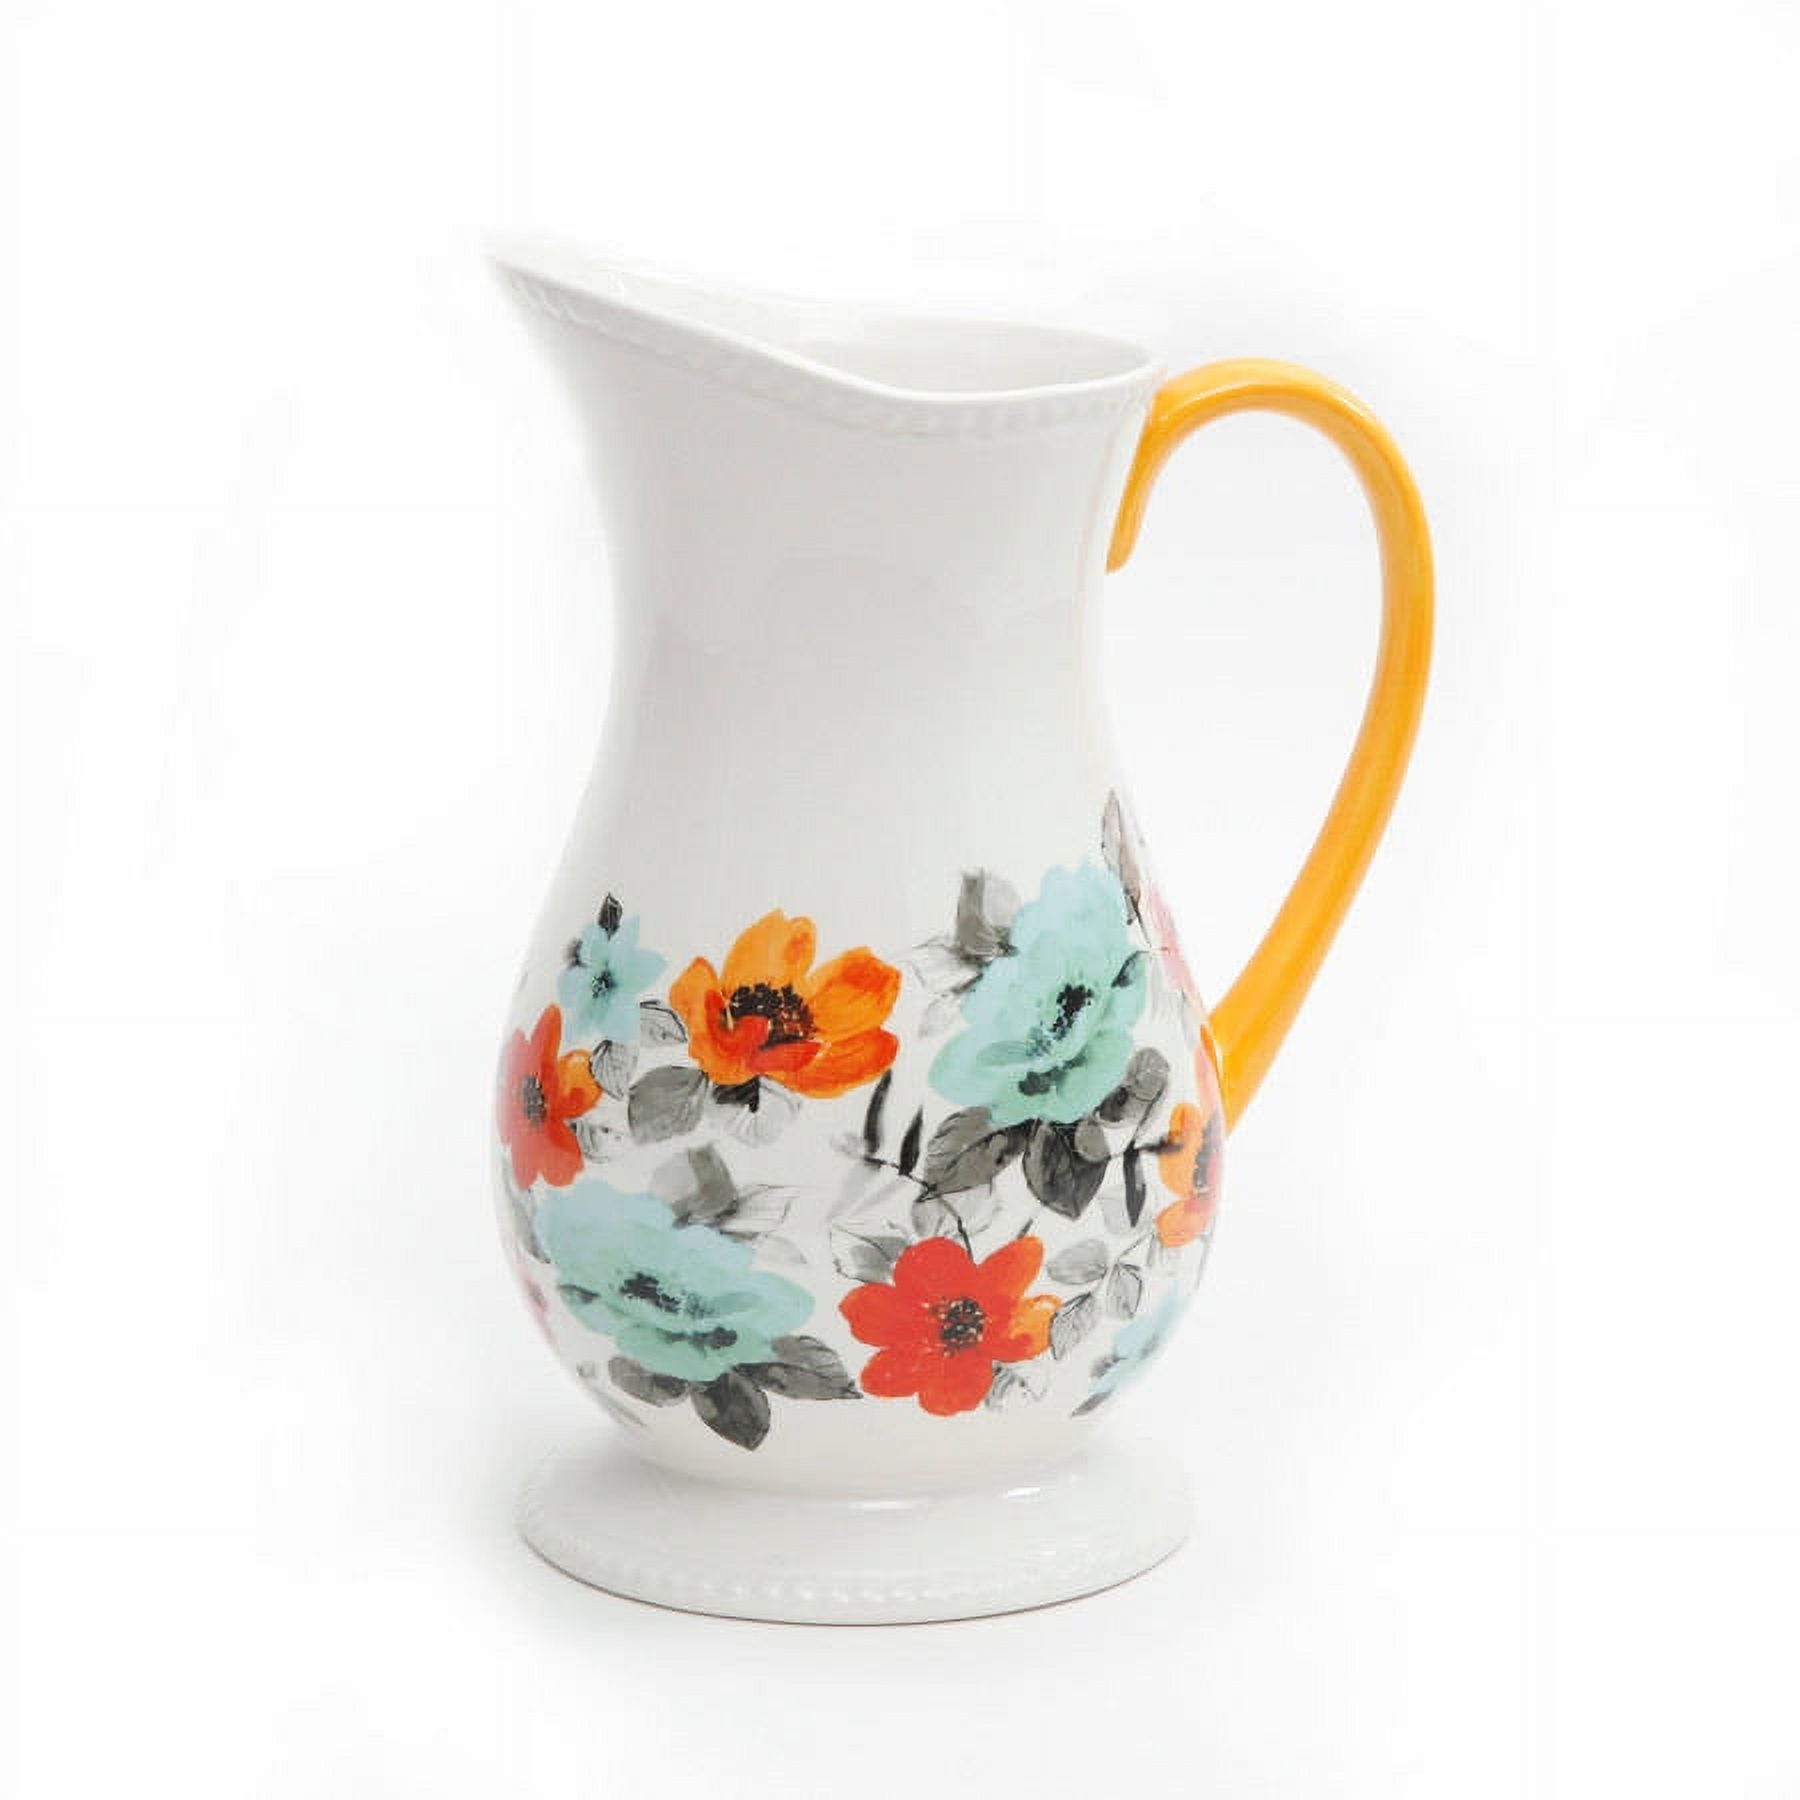 The Pioneer Woman Flea Market White Decorated Floral 2-Quart Pitcher - image 2 of 7